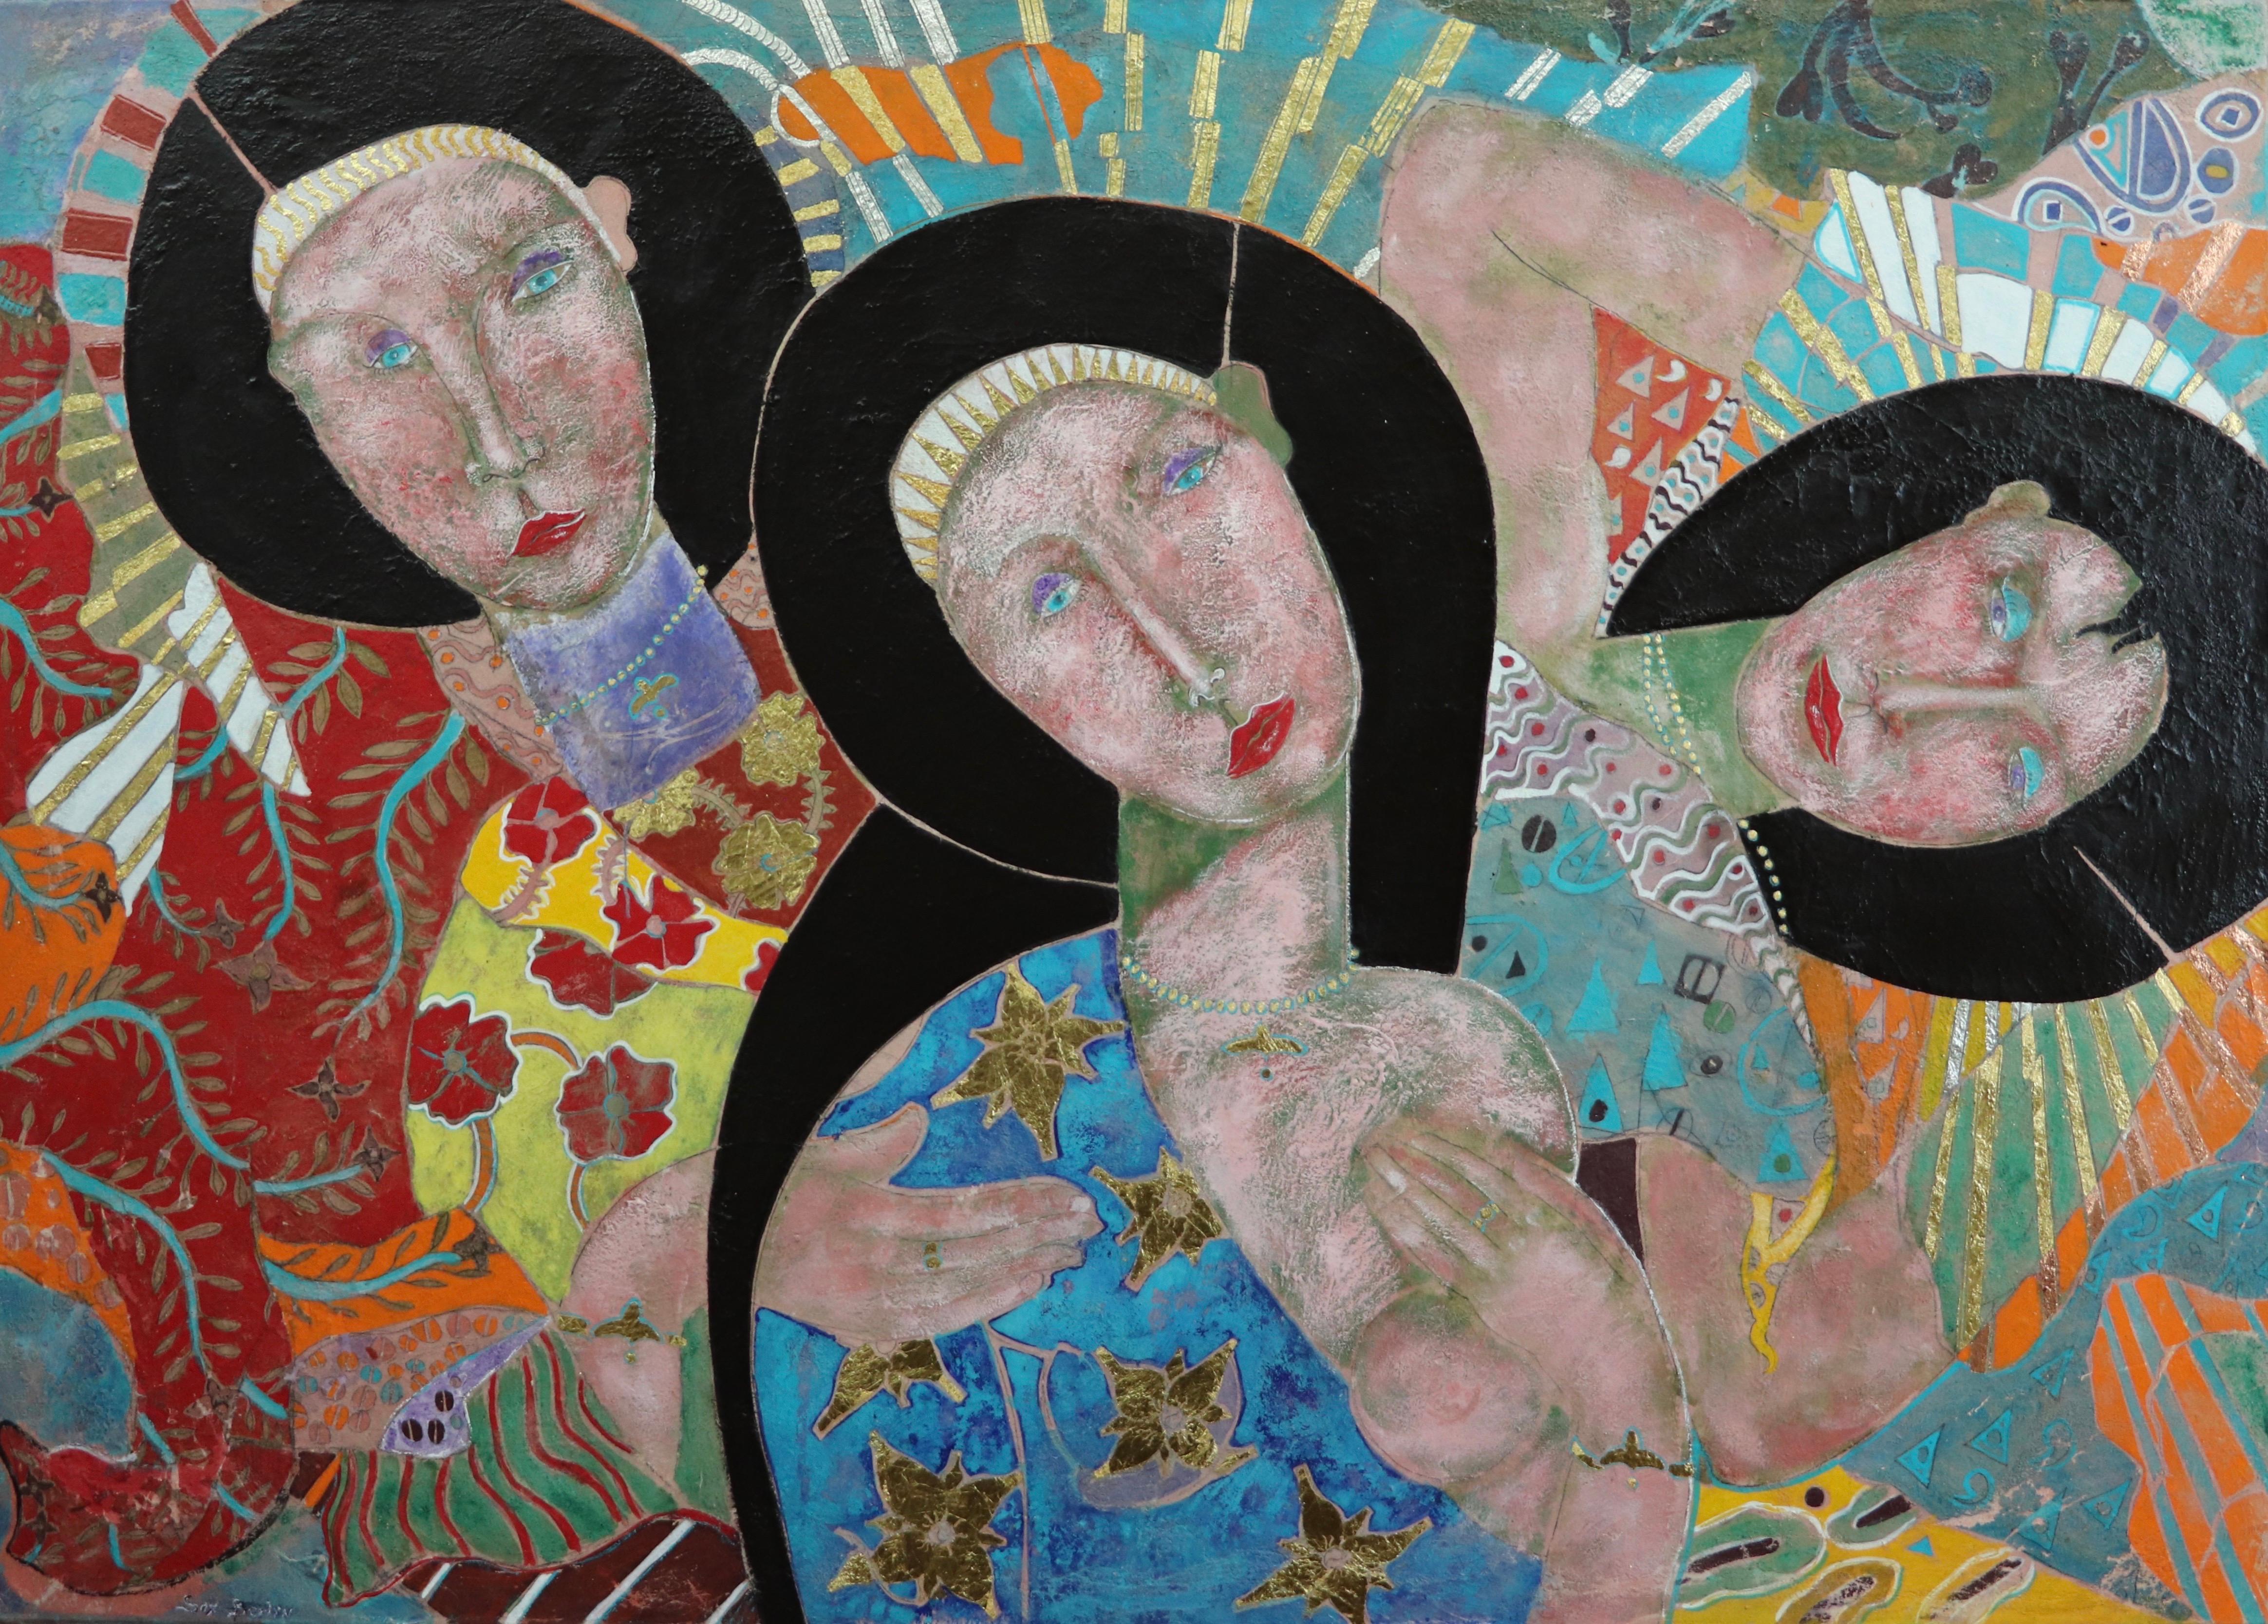 "The Wisdom In Women".     Contemporary Mixed Media Figurative Painting - Mixed Media Art by Sax Berlin